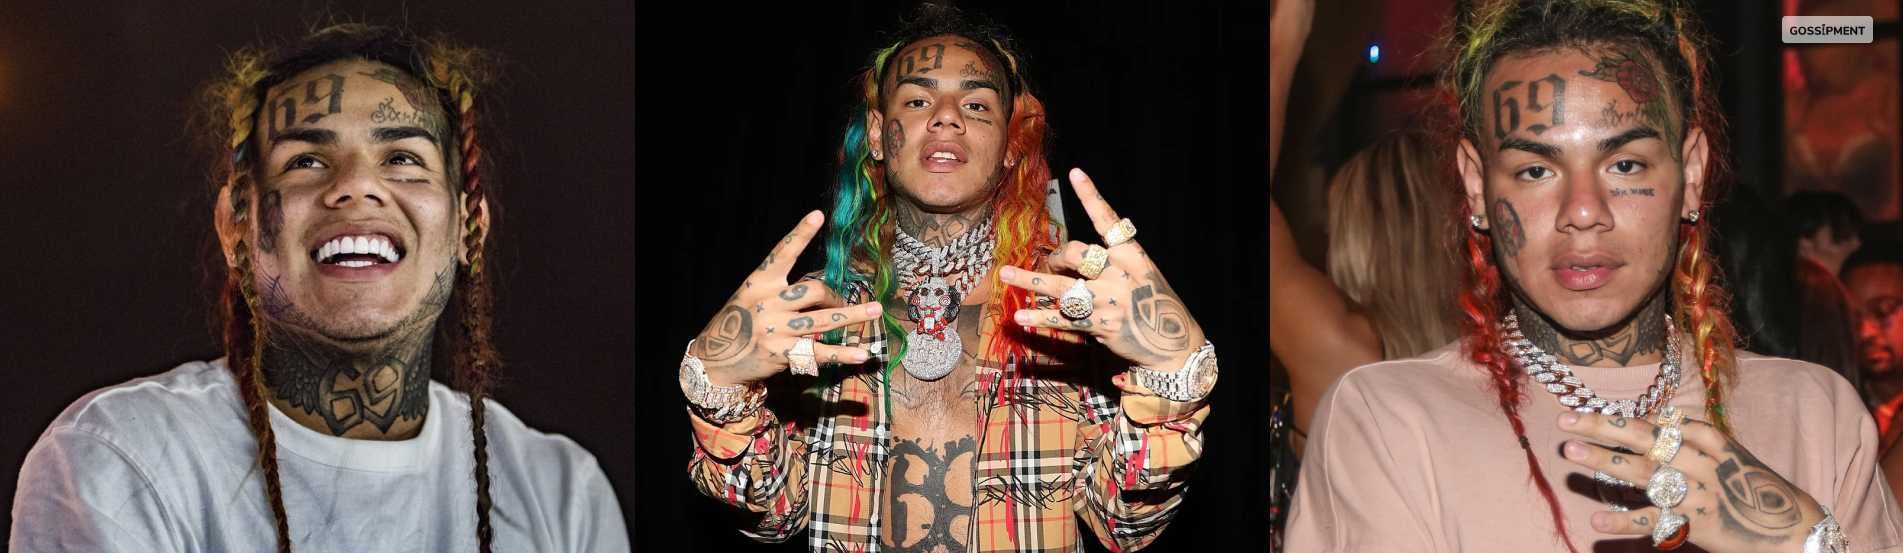 Cover Image for <strong>6ix9ine Net Worth: How Rich Is Tekashi69?</strong>